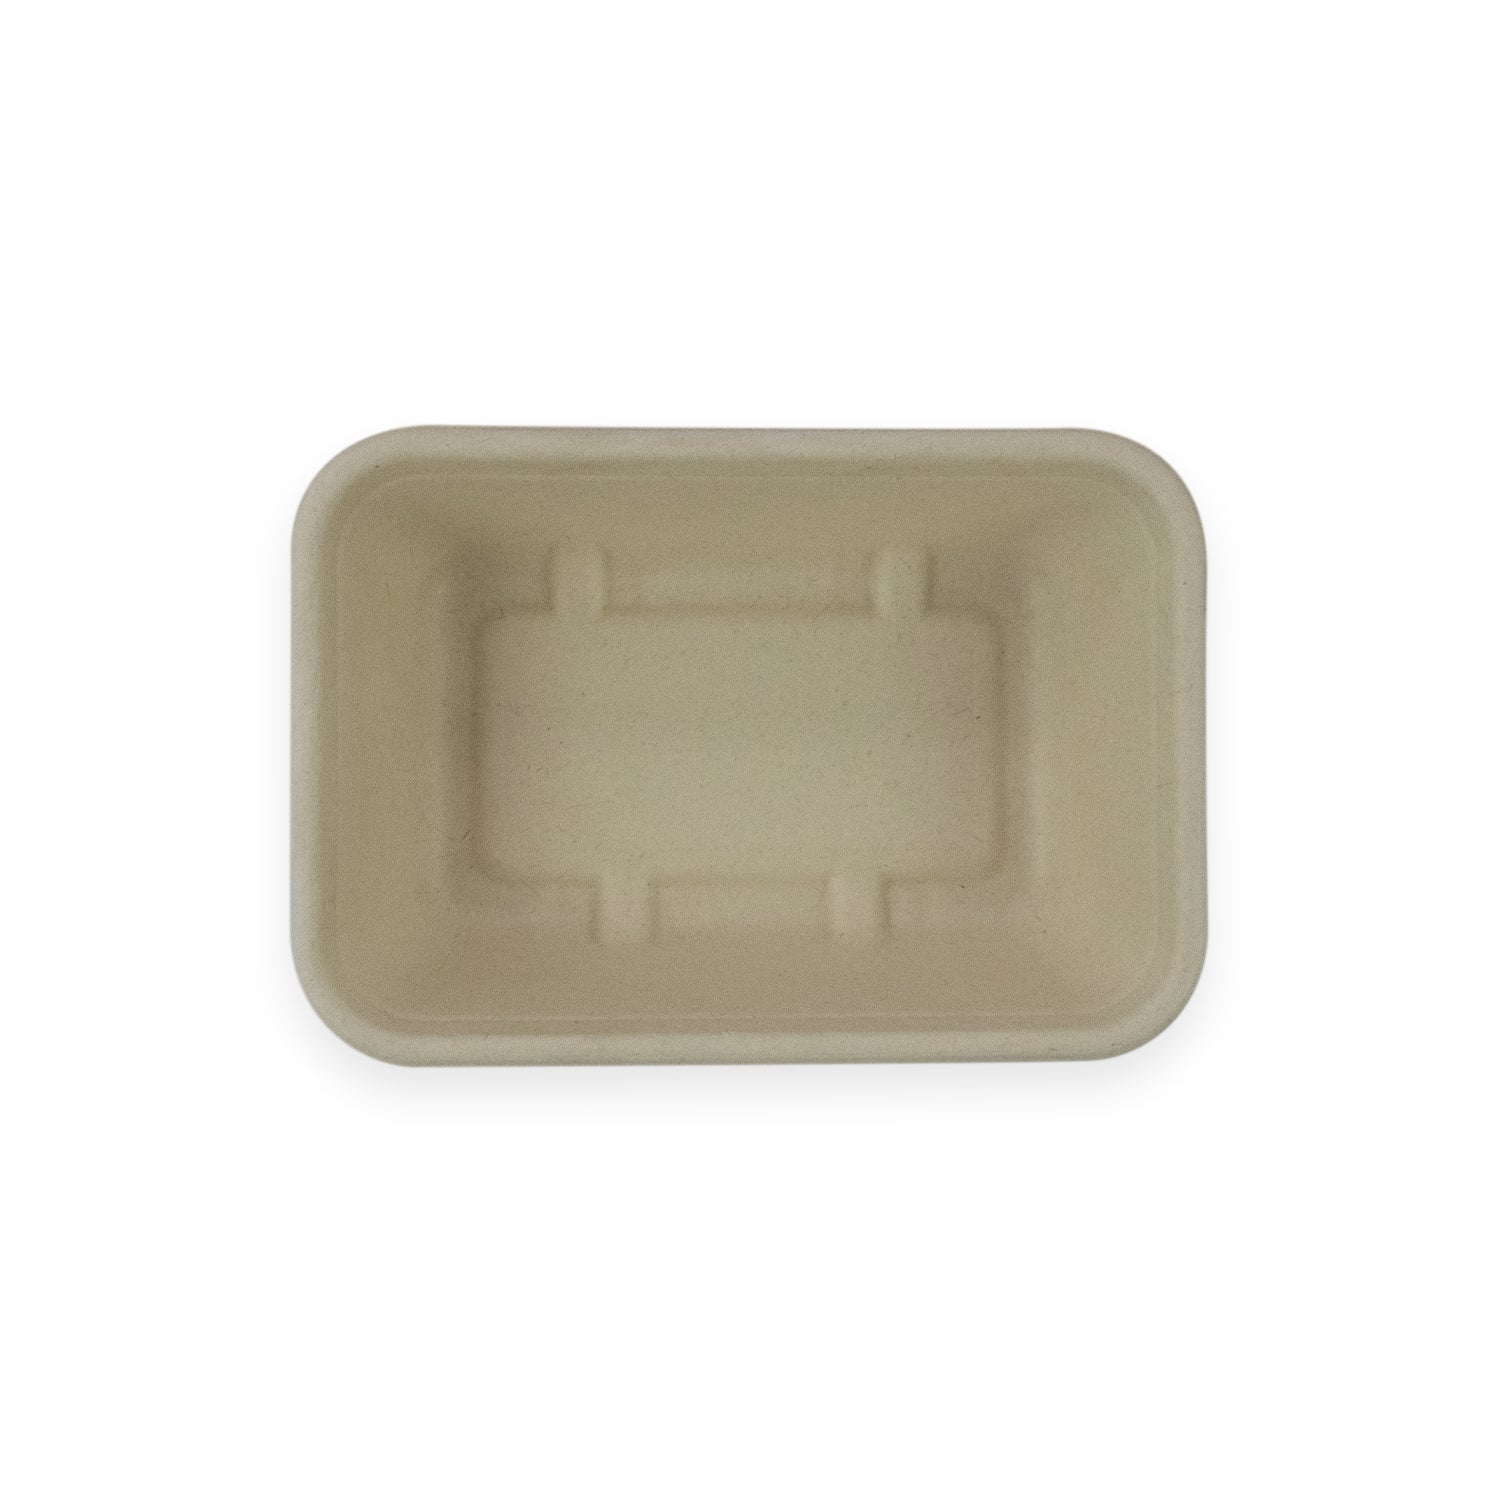 Sustain Sustain Sugarcane Rectangular Container Natural 650ml - CT/500 Disposable Food Packaging  